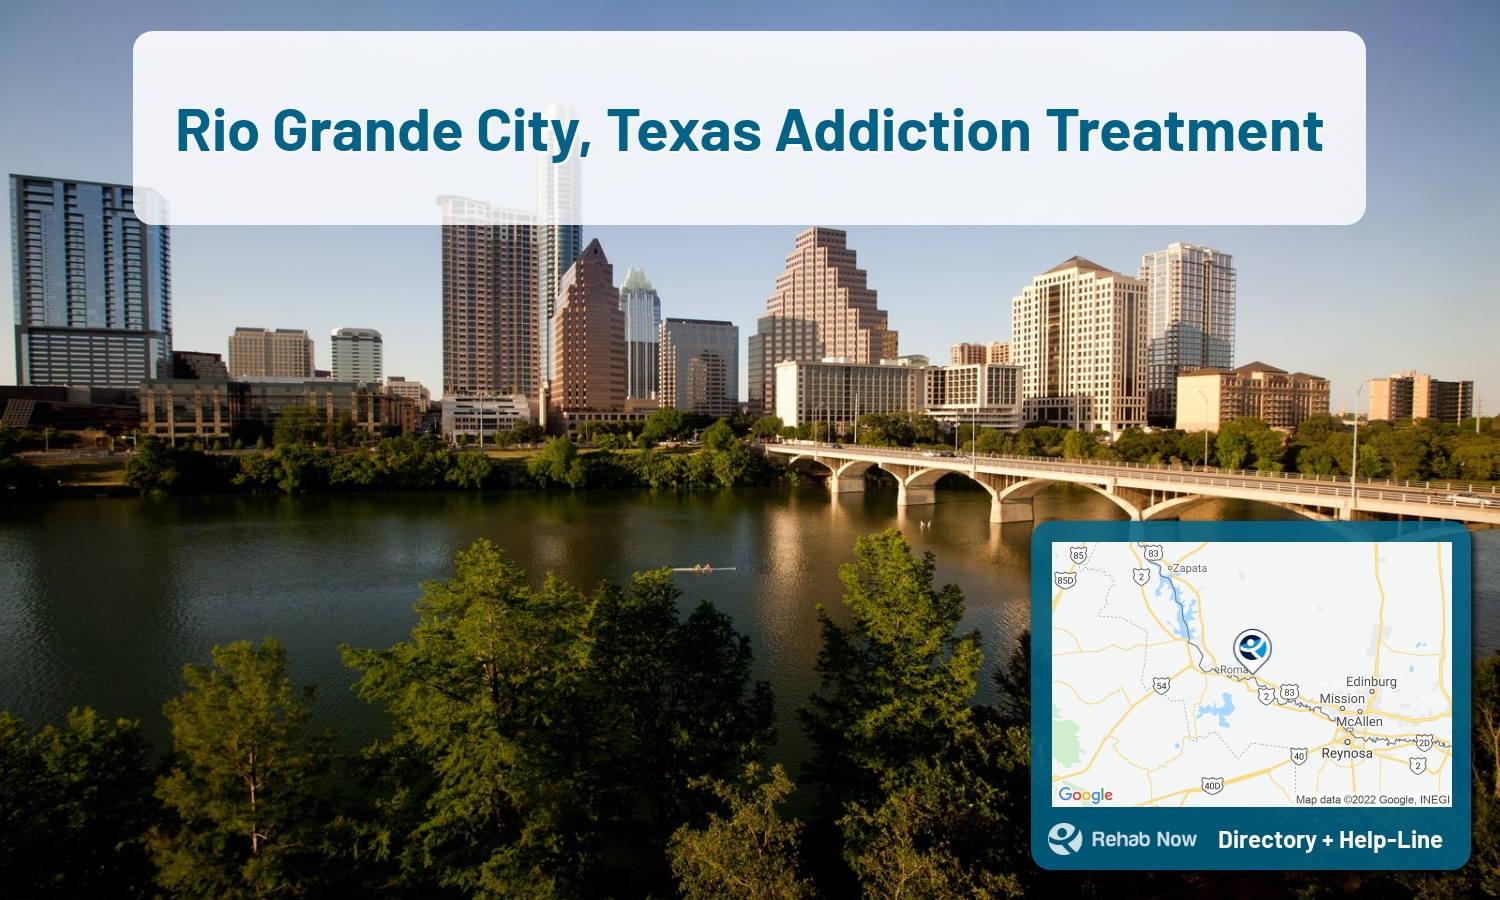 Find drug rehab and alcohol treatment services in Rio Grande City. Our experts help you find a center in Rio Grande City, Texas